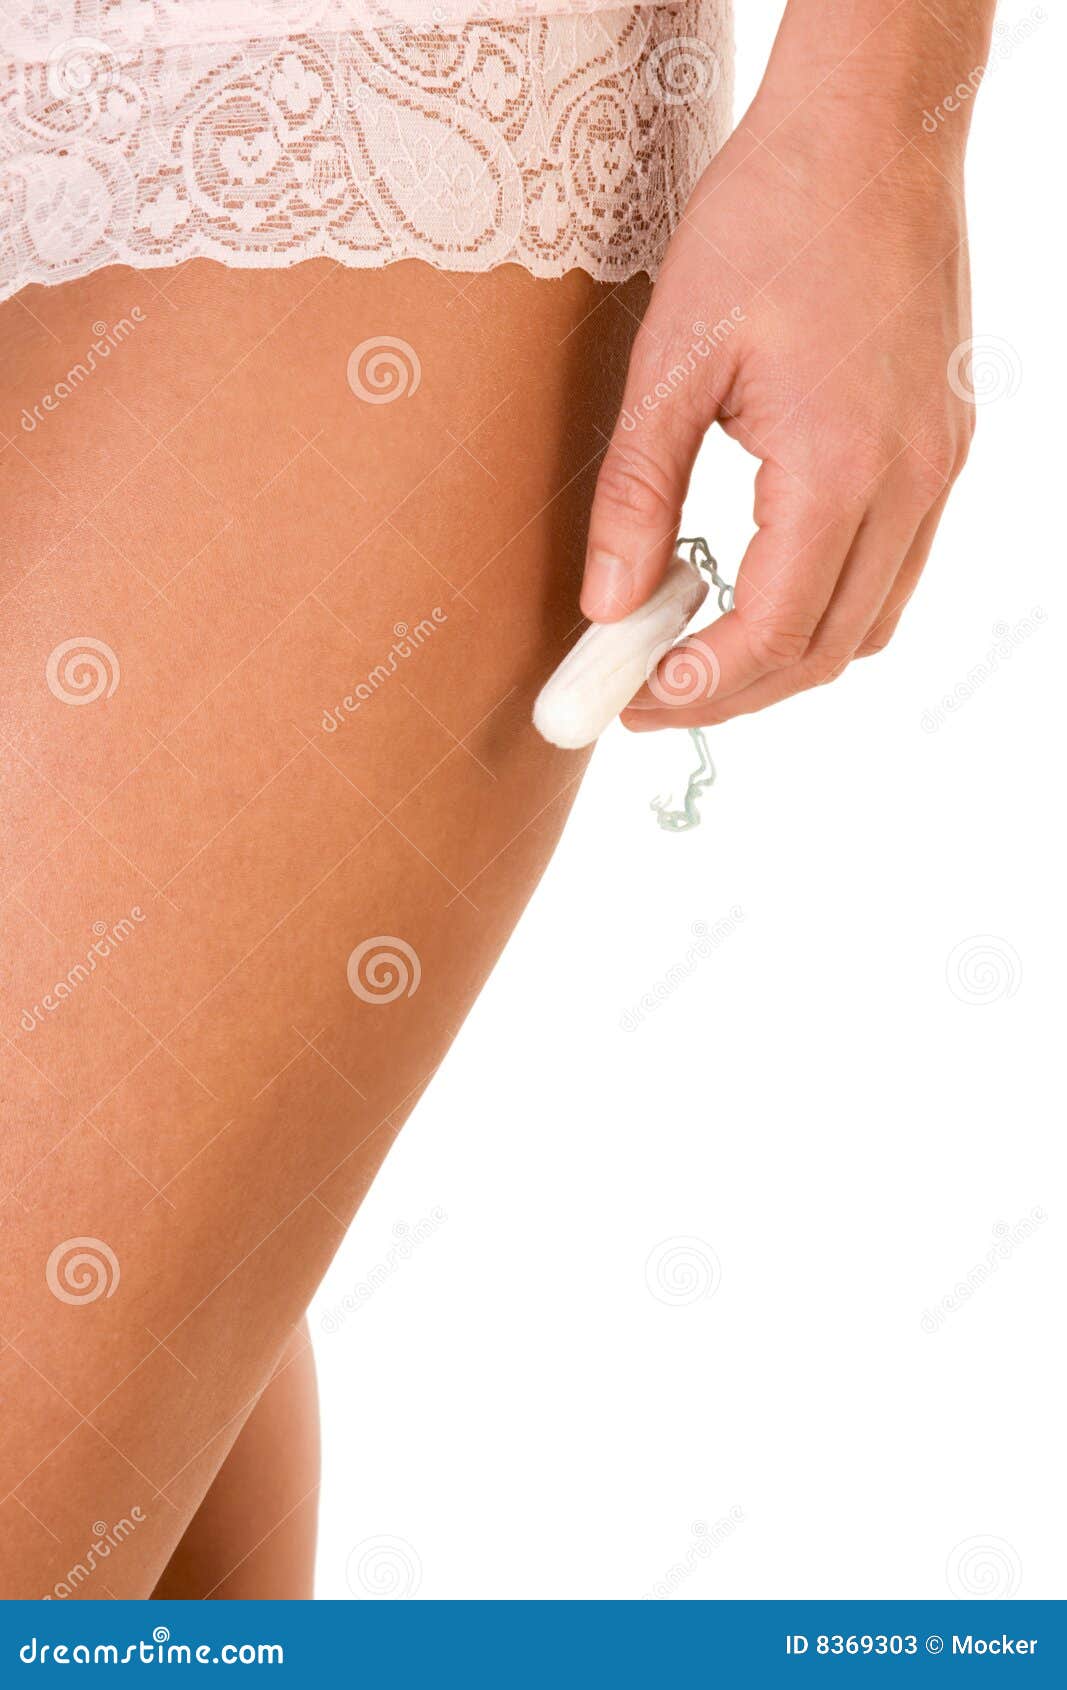 woman hand hold white cotton hygienic tampon